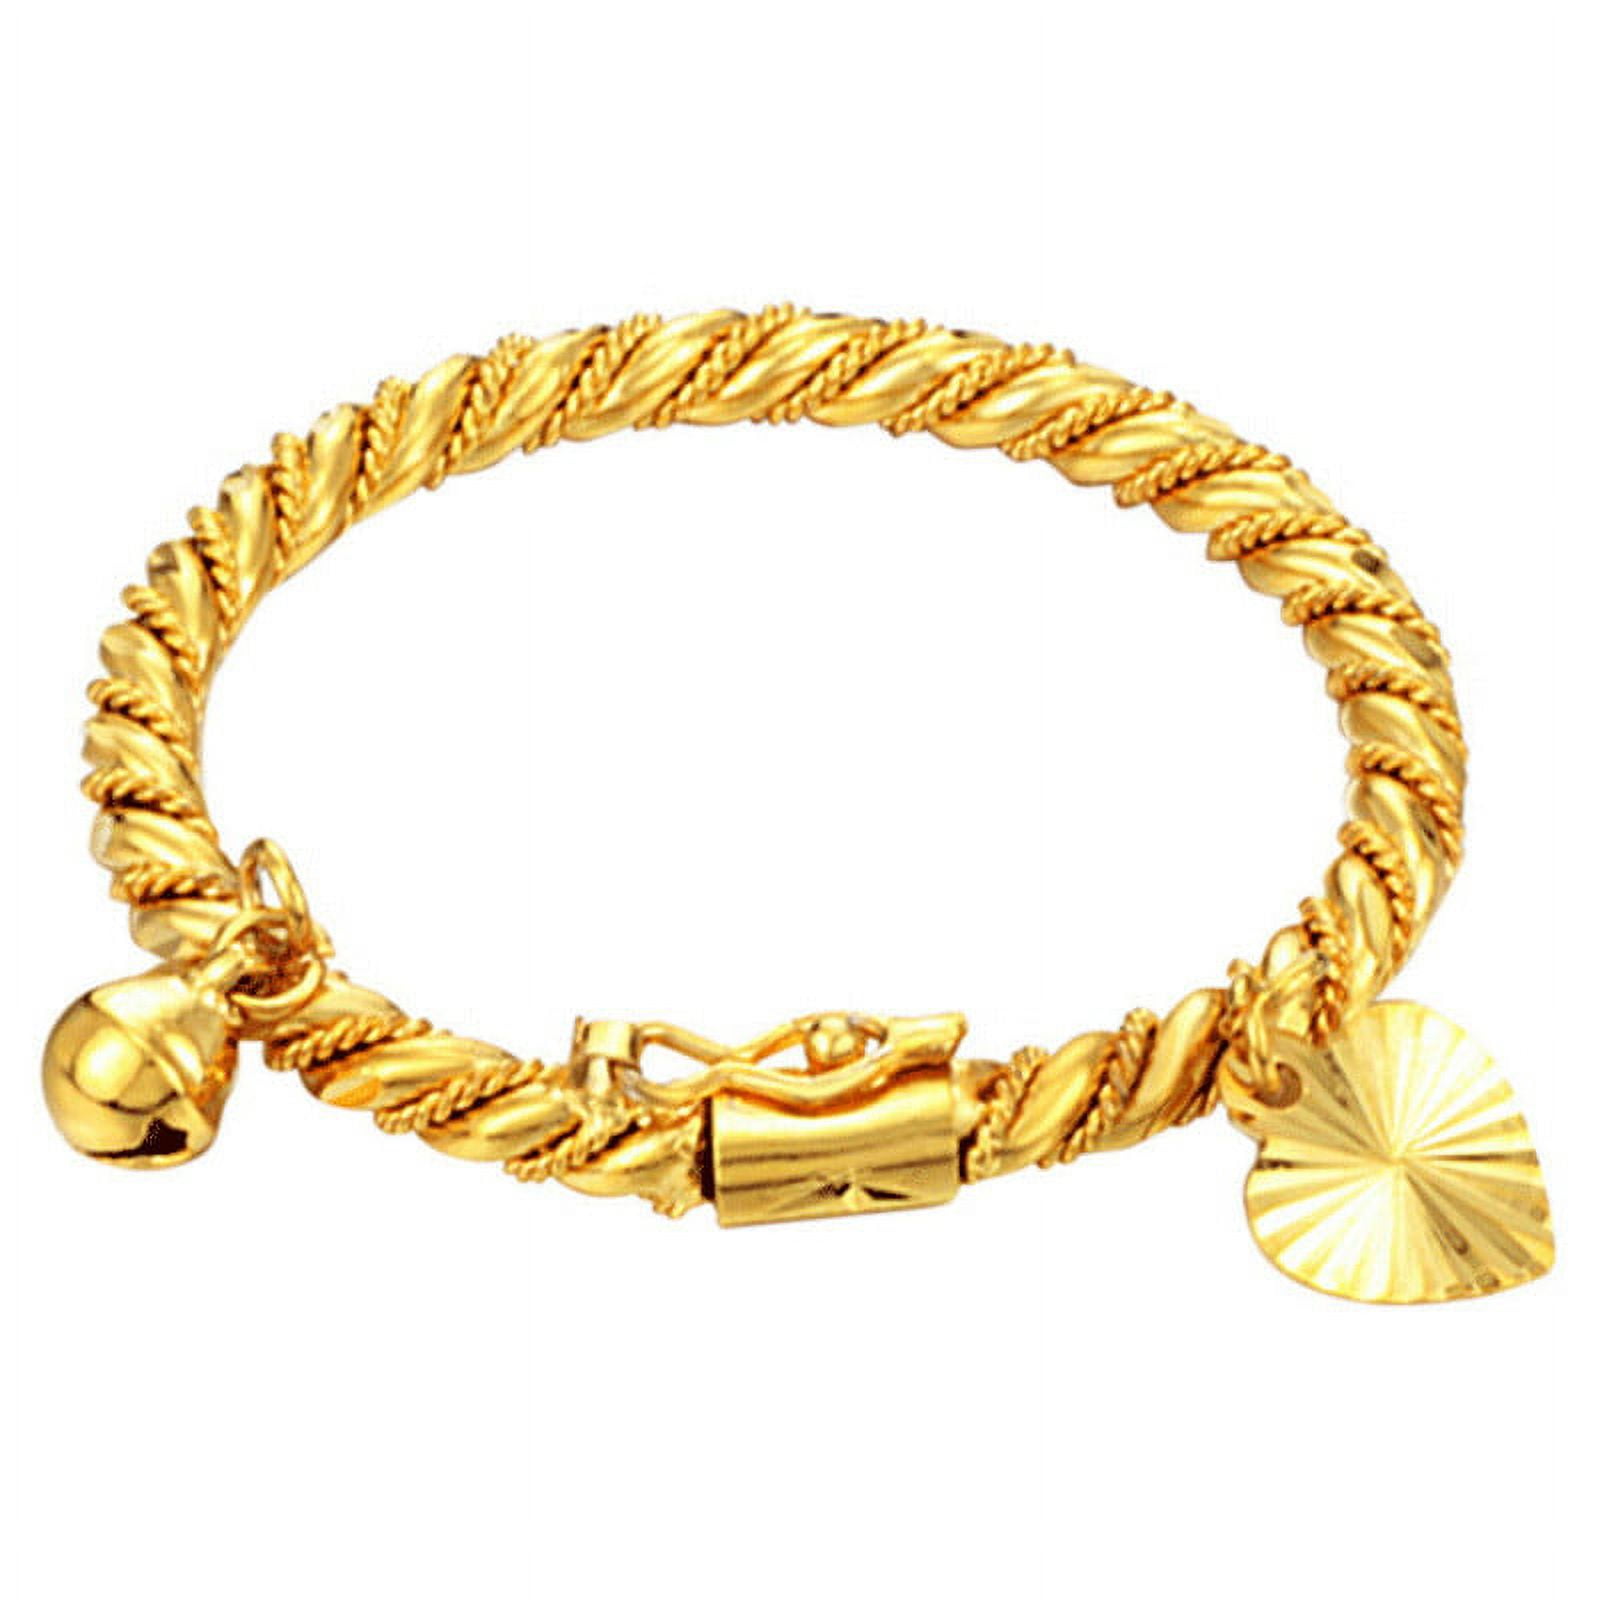 French Gold Triumphal Arch Dainty Bracelets For Women Light Luxury Ins  Style Handjewelry From Fashionbuyer1, $23.62 | DHgate.Com